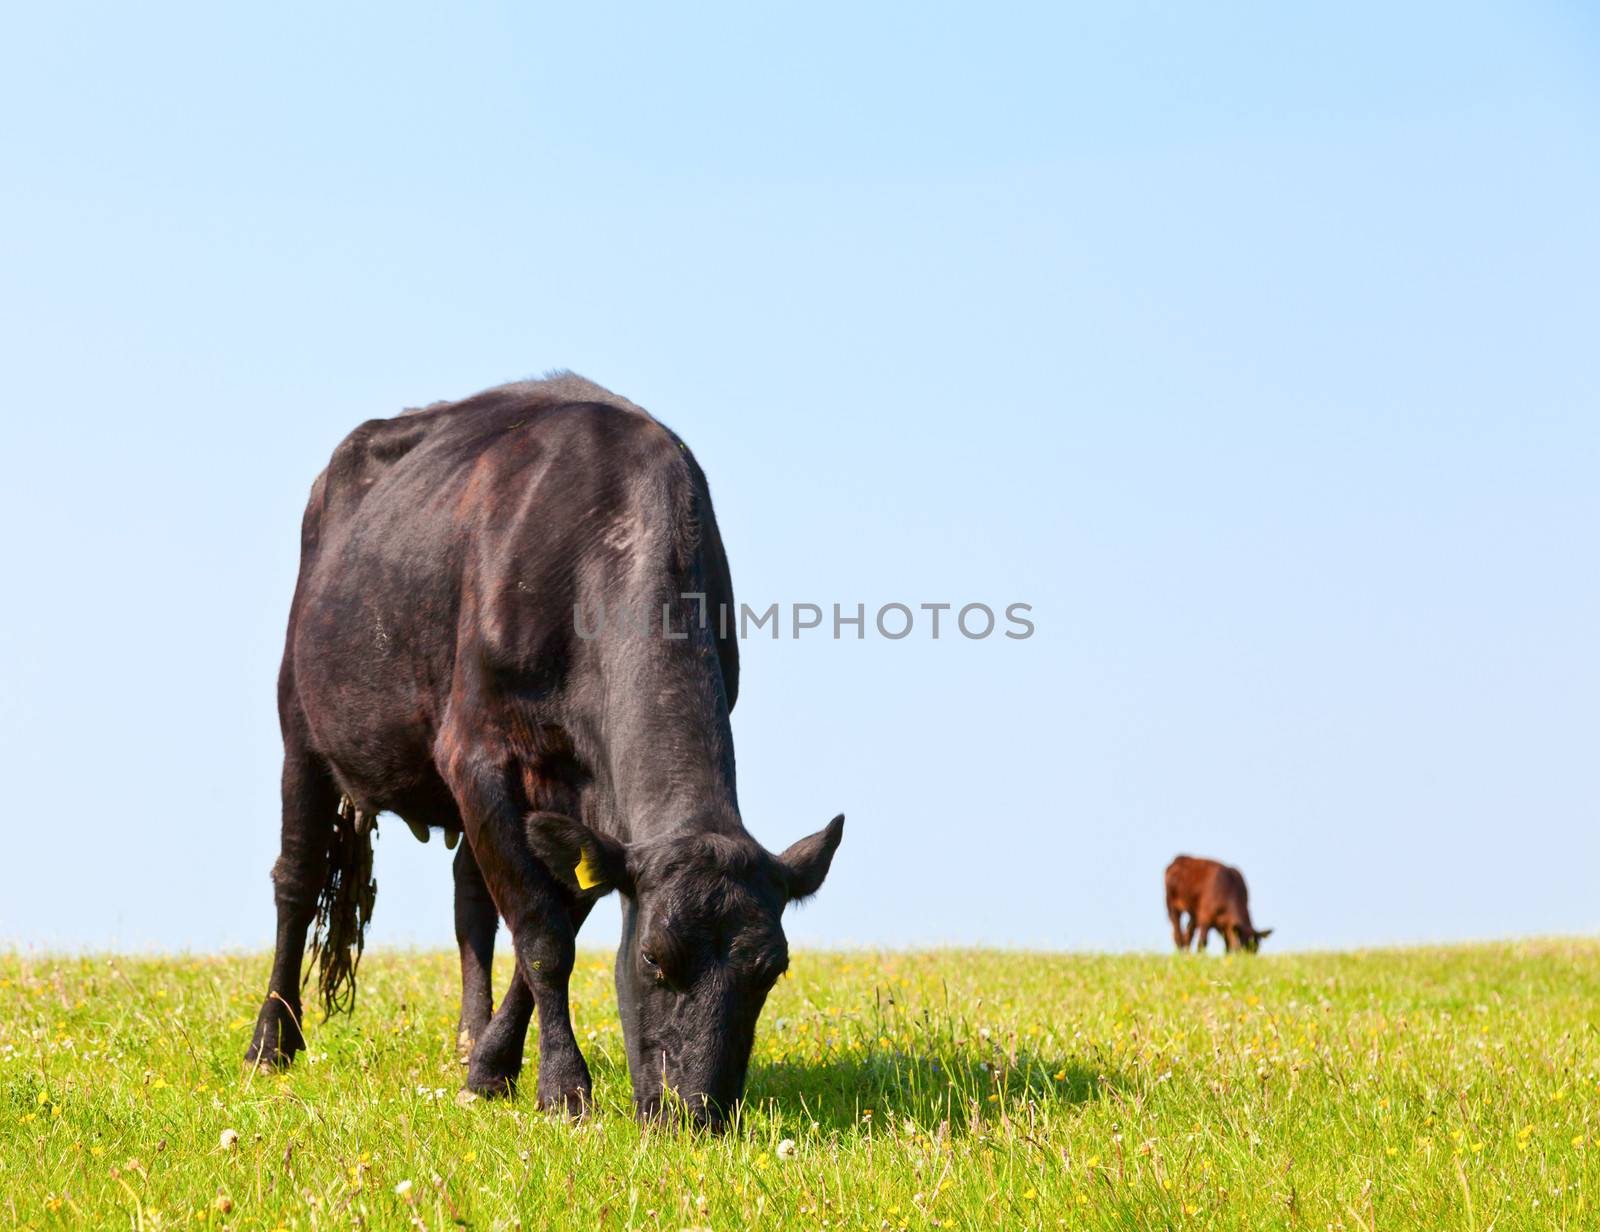 Grazing cow by naumoid